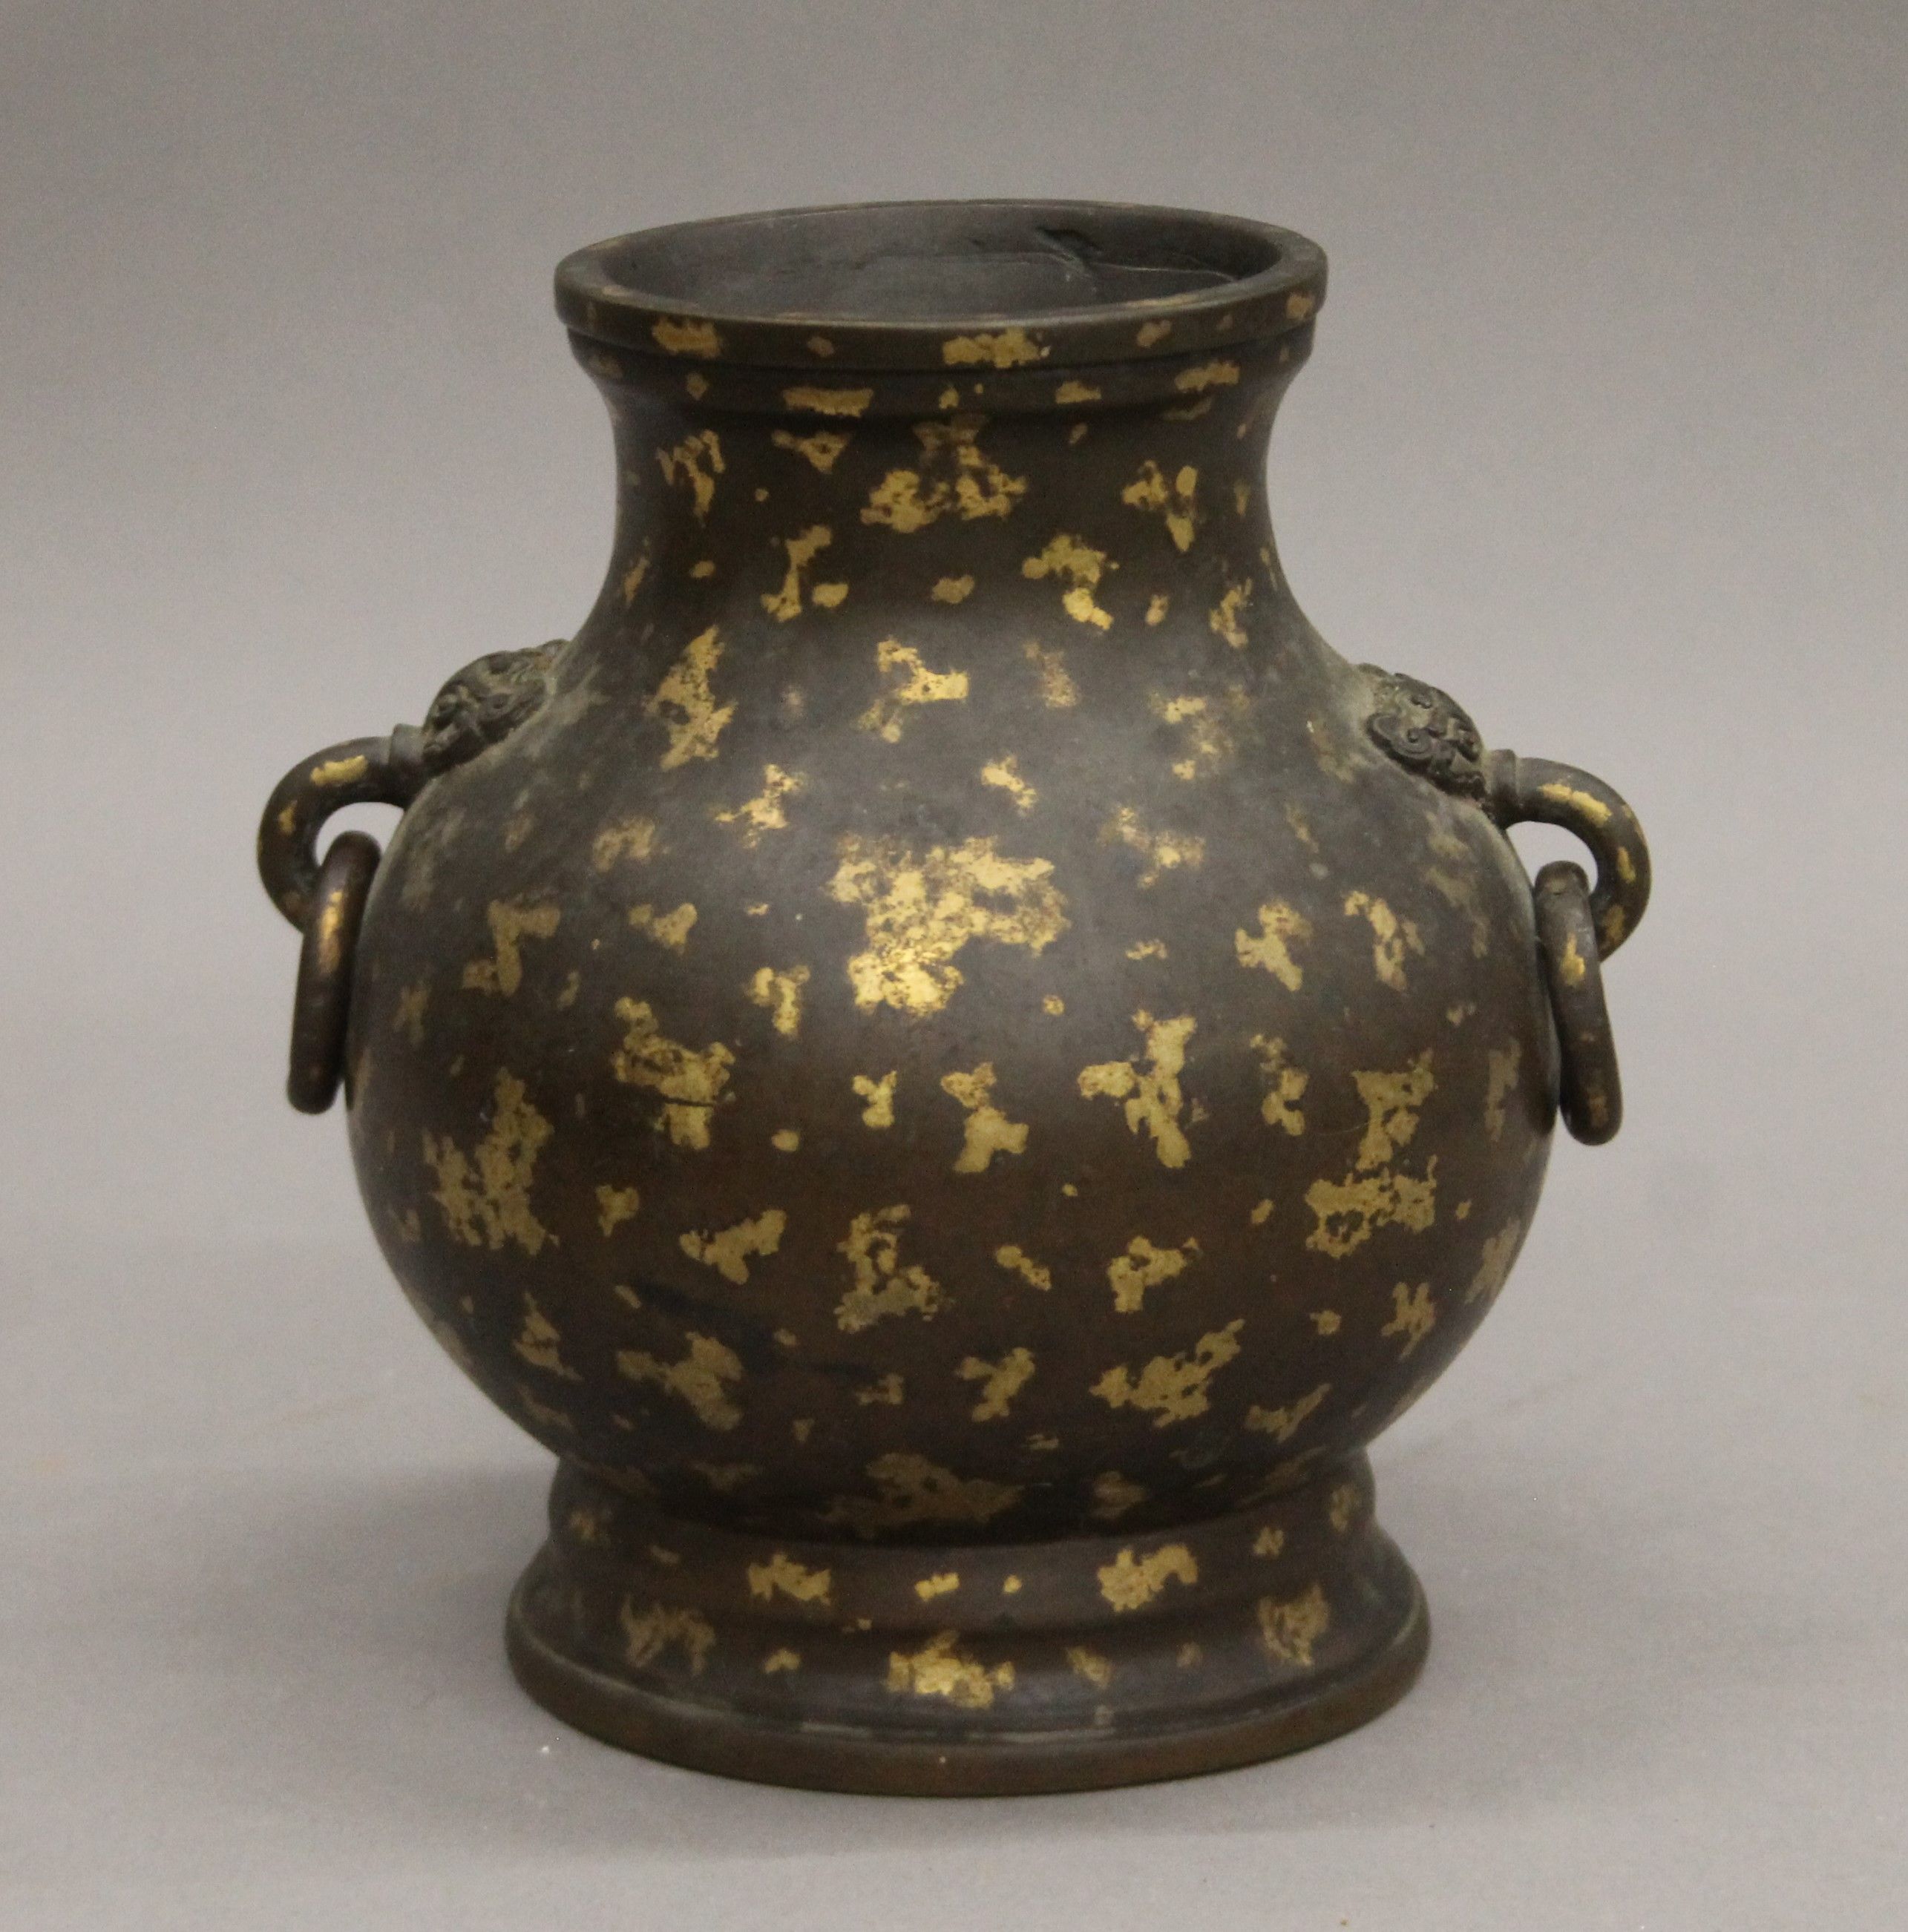 A Chinese gold splash bronze twin handled vase, possibly 18th/19th century,